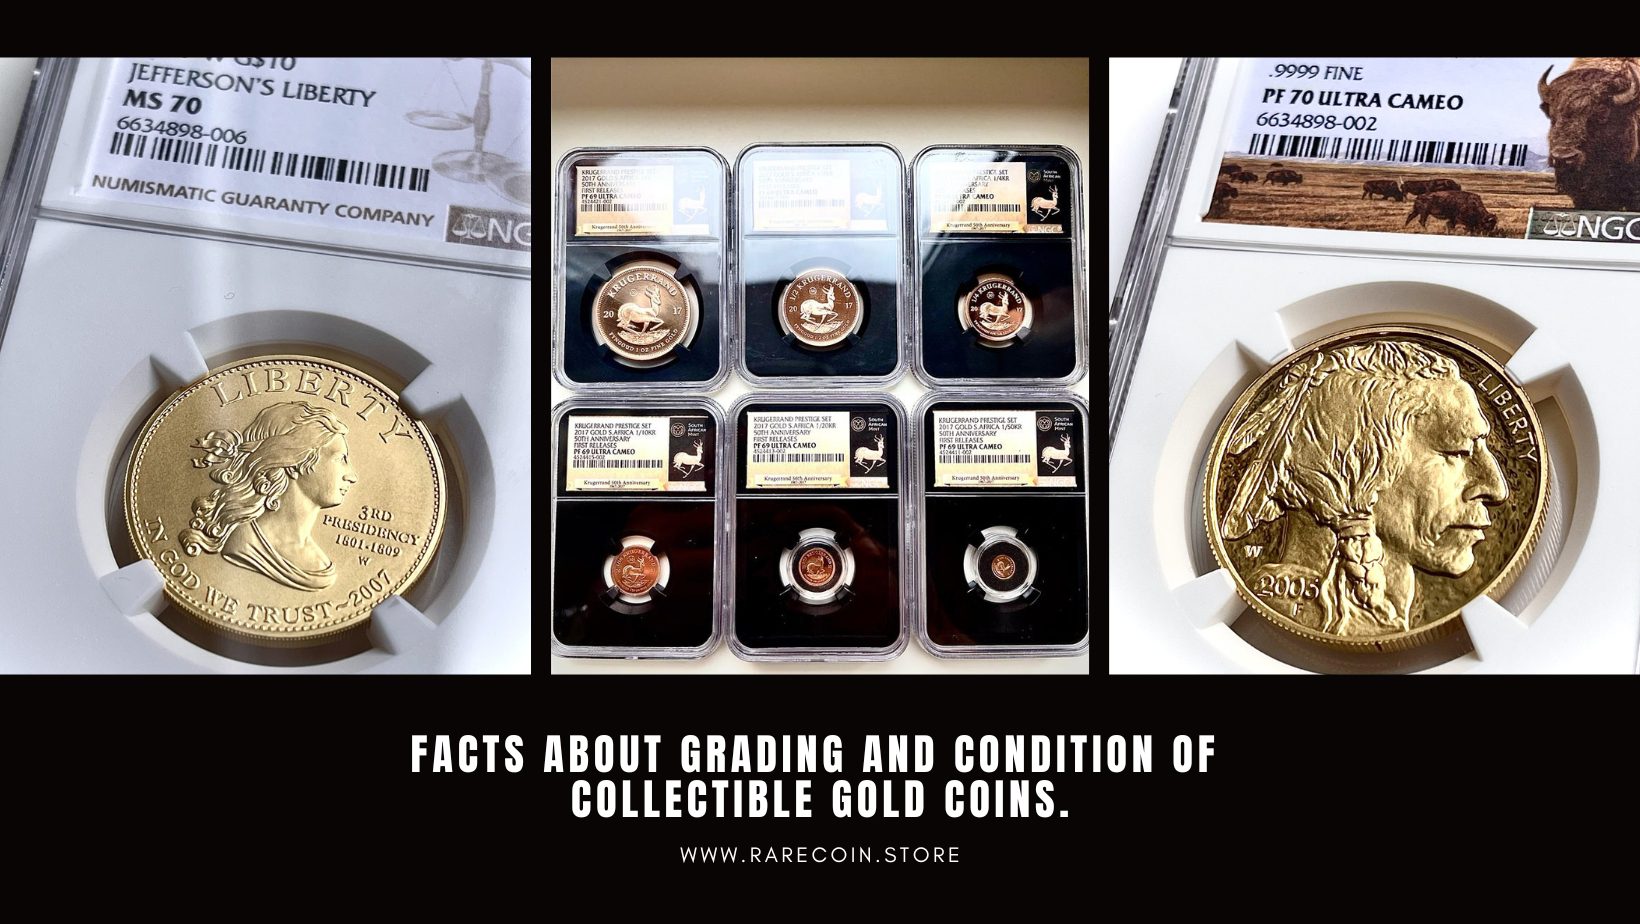 Facts about grading, the condition of gold collector coins